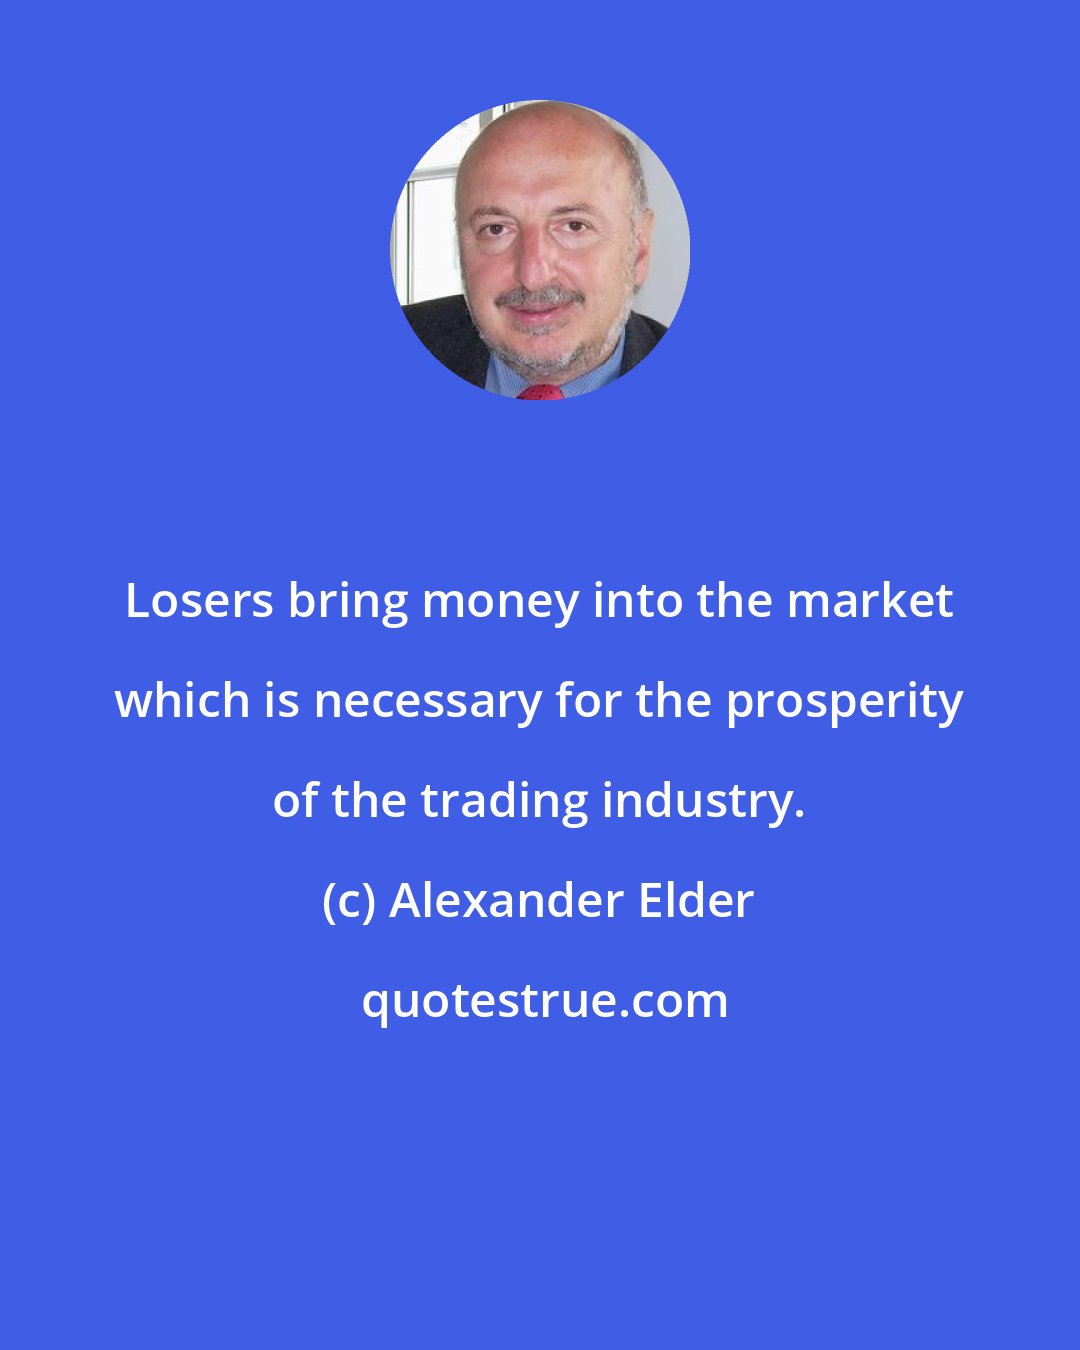 Alexander Elder: Losers bring money into the market which is necessary for the prosperity of the trading industry.